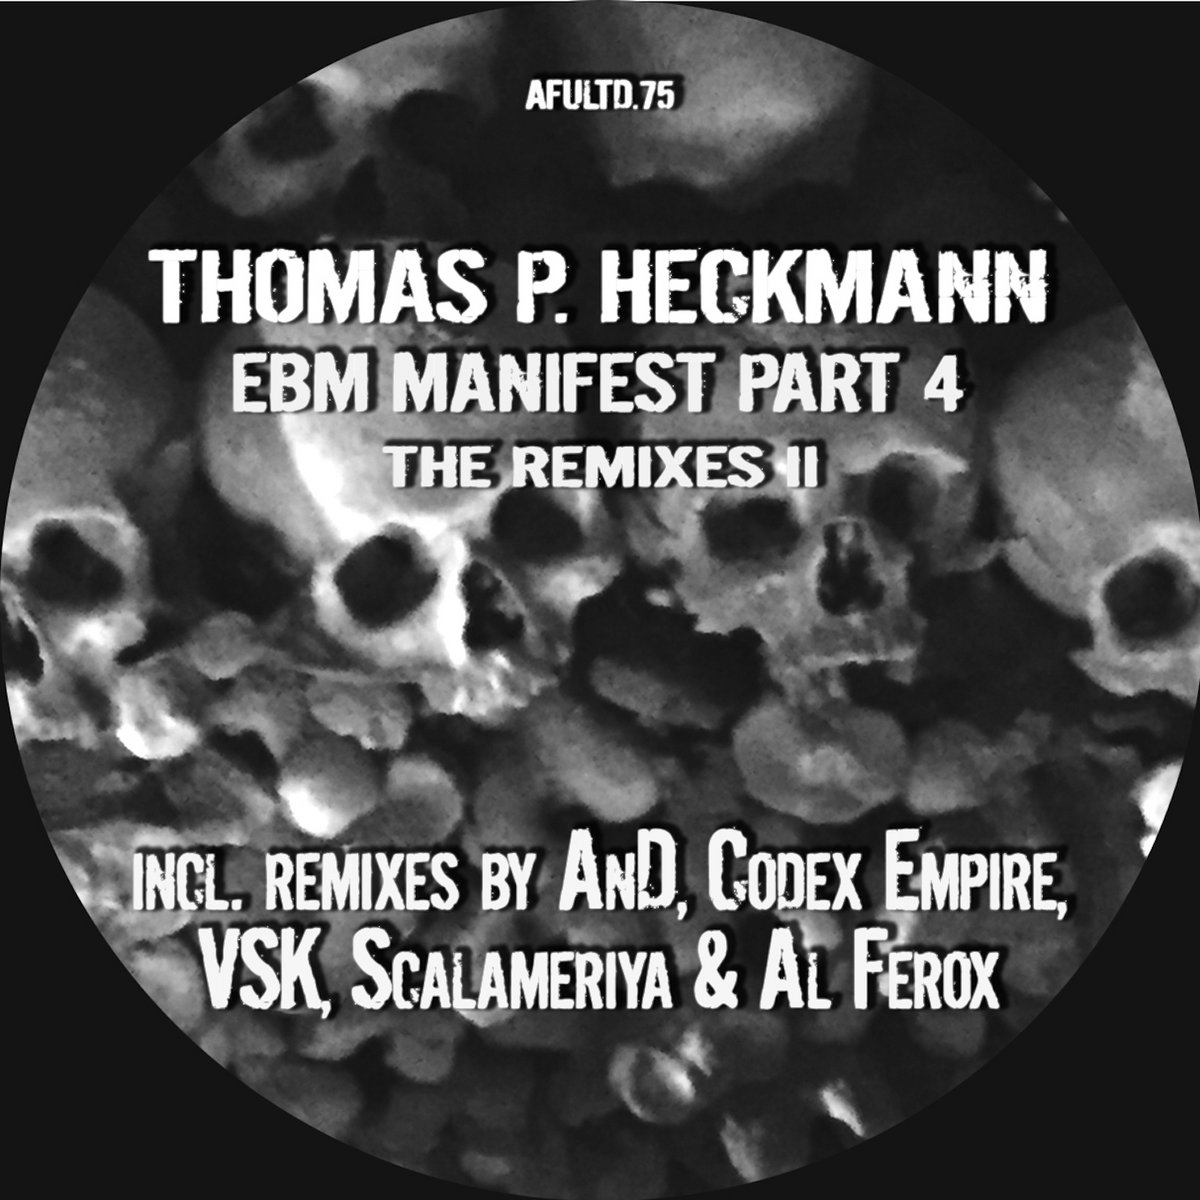 Himmel Holle And Remix Thomas P Heckmann - from ebm manifest part 4 the remixes ii by thomas p heckmann